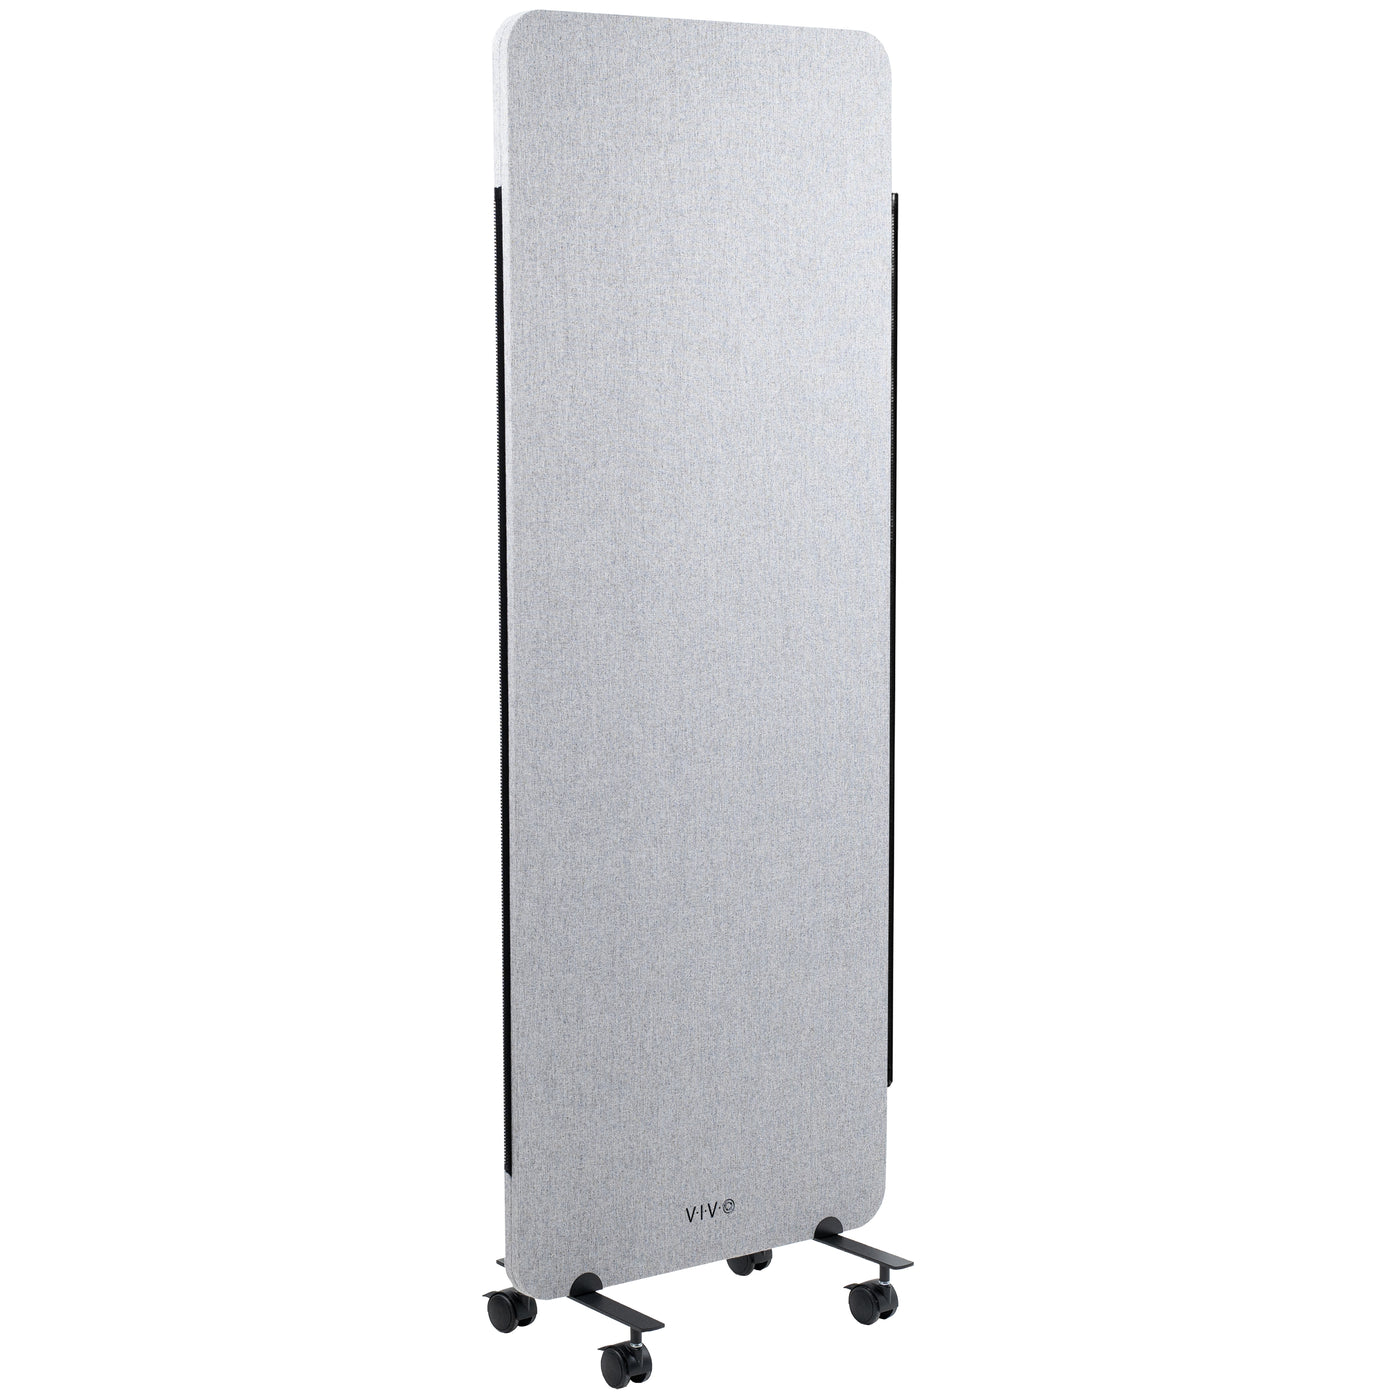 Single Panel Gray Mobile Freestanding Room Divider provides a convenient partition and workspace privacy.